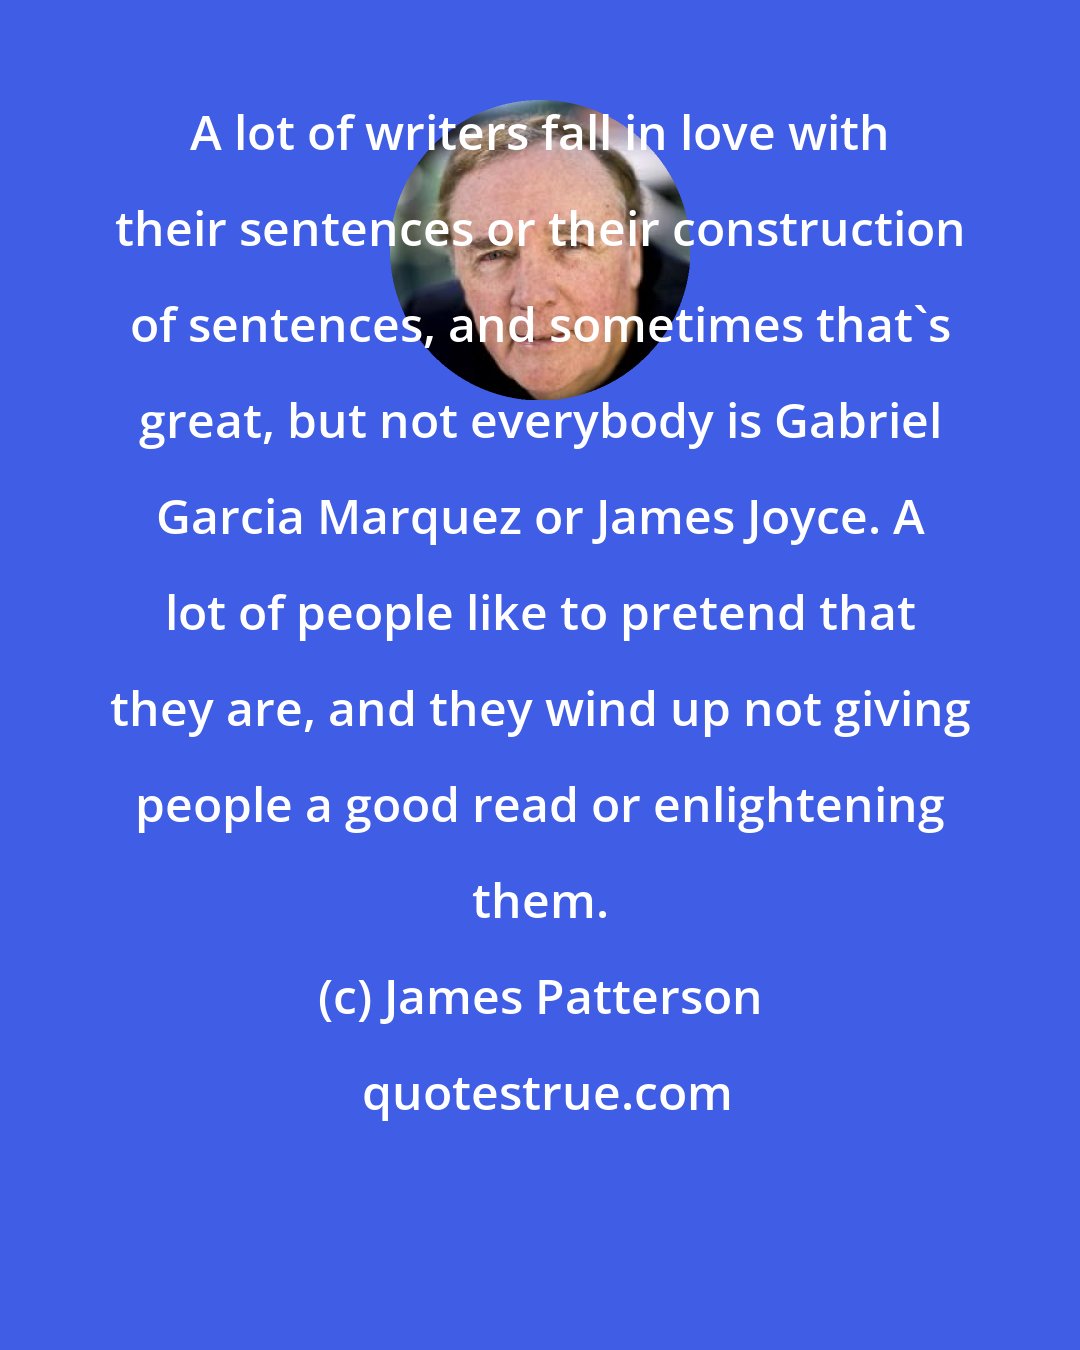 James Patterson: A lot of writers fall in love with their sentences or their construction of sentences, and sometimes that's great, but not everybody is Gabriel Garcia Marquez or James Joyce. A lot of people like to pretend that they are, and they wind up not giving people a good read or enlightening them.